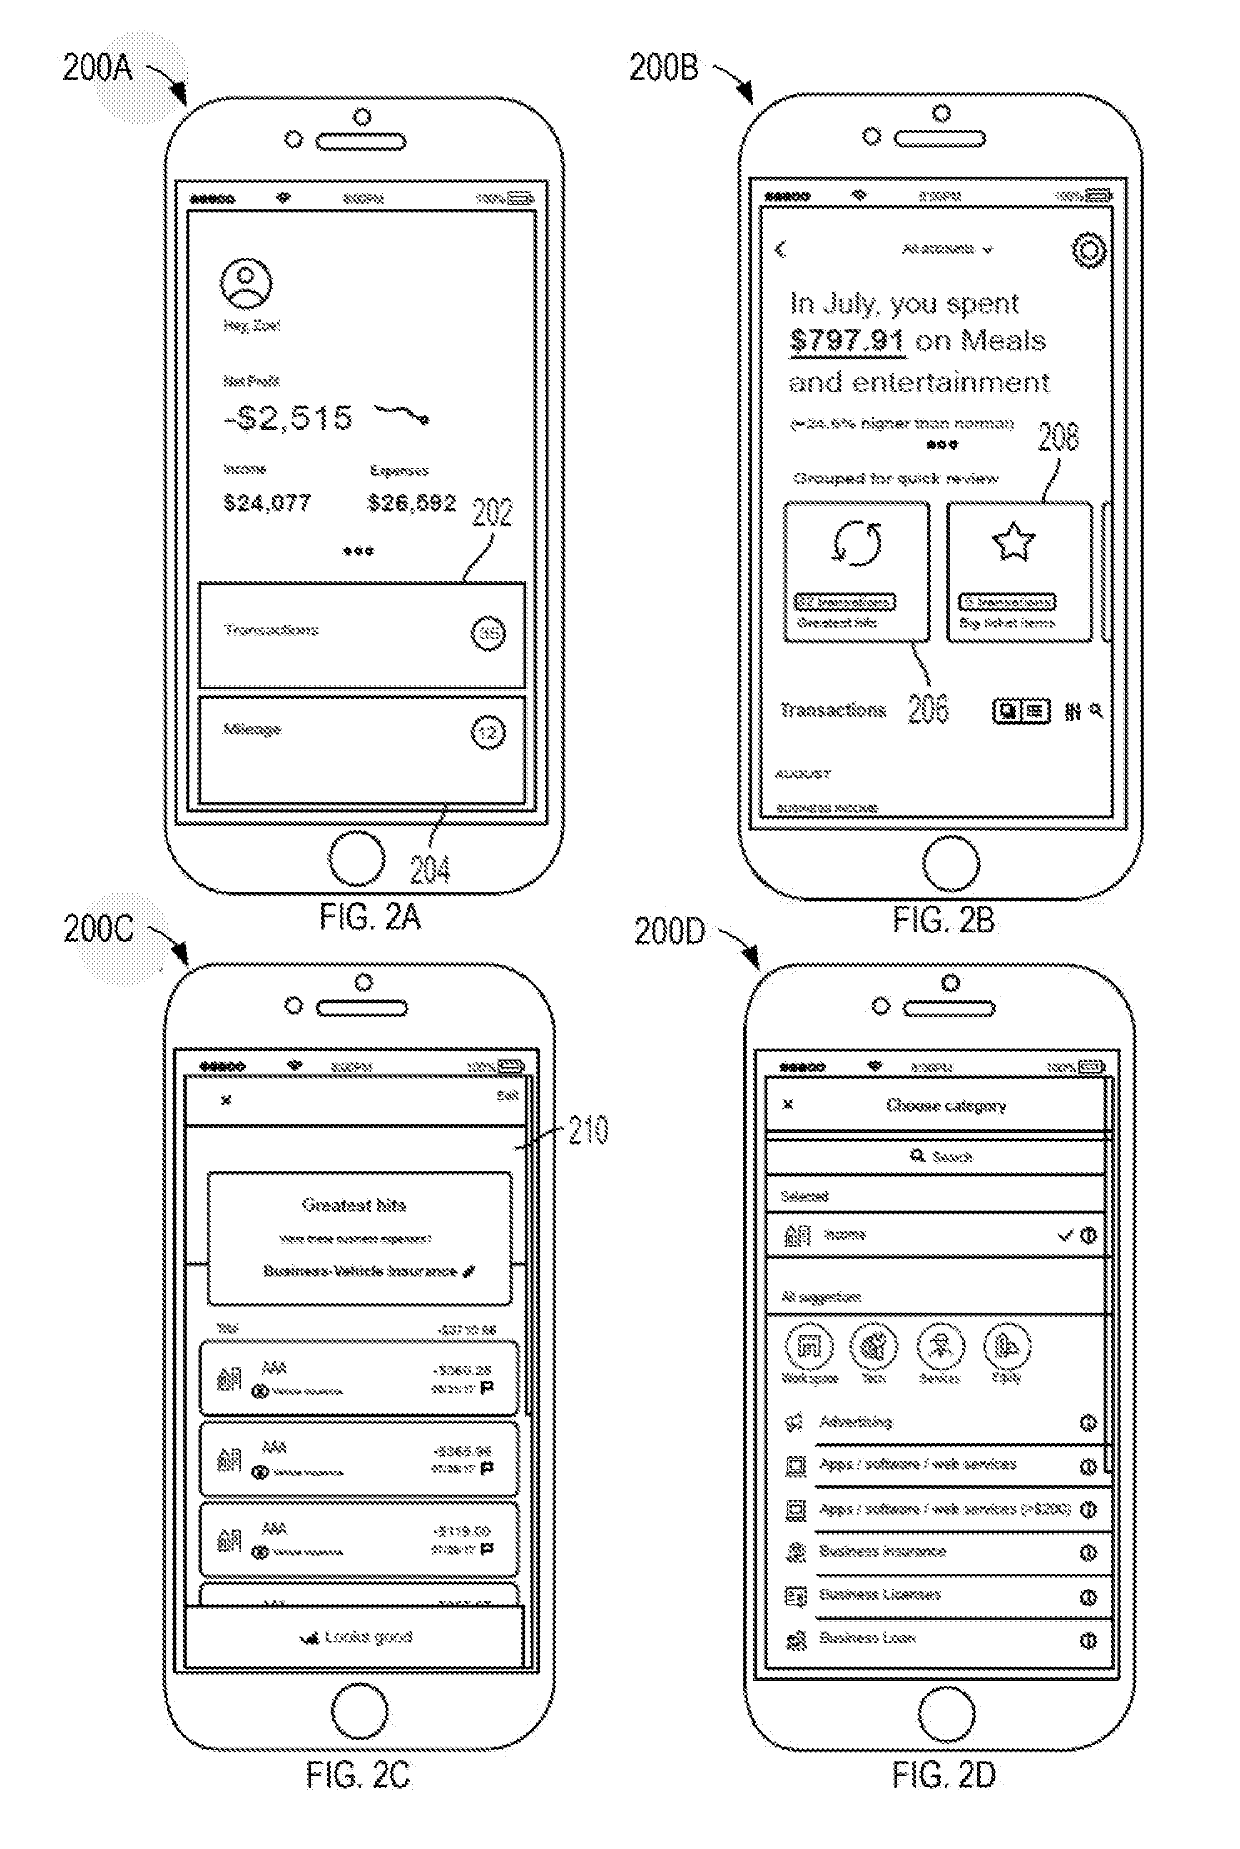 User interfaces based on pre-classified data sets